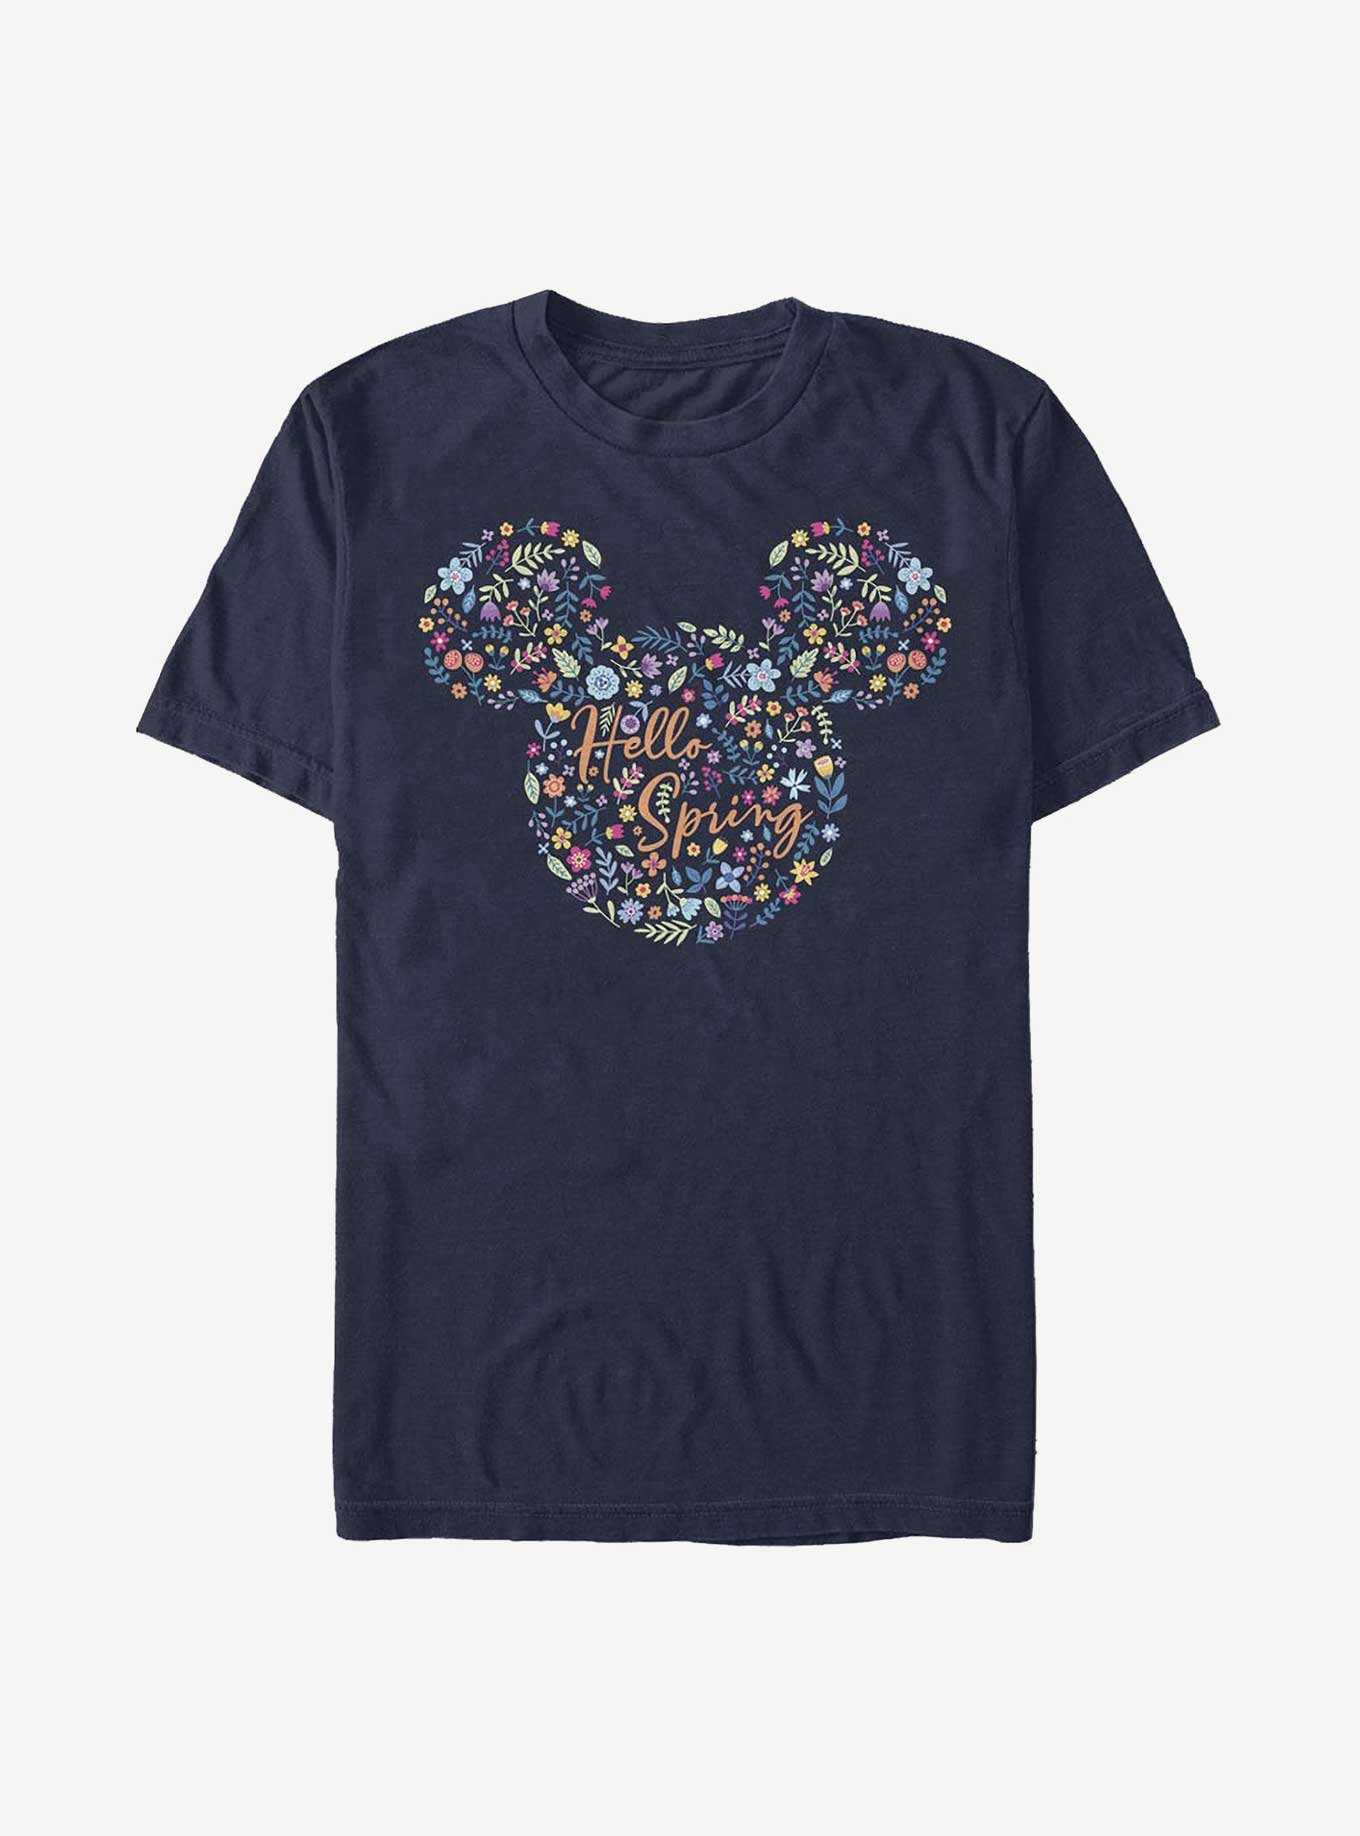 Disney Mickey Mouse Floral Ears T-Shirt, , hi-res